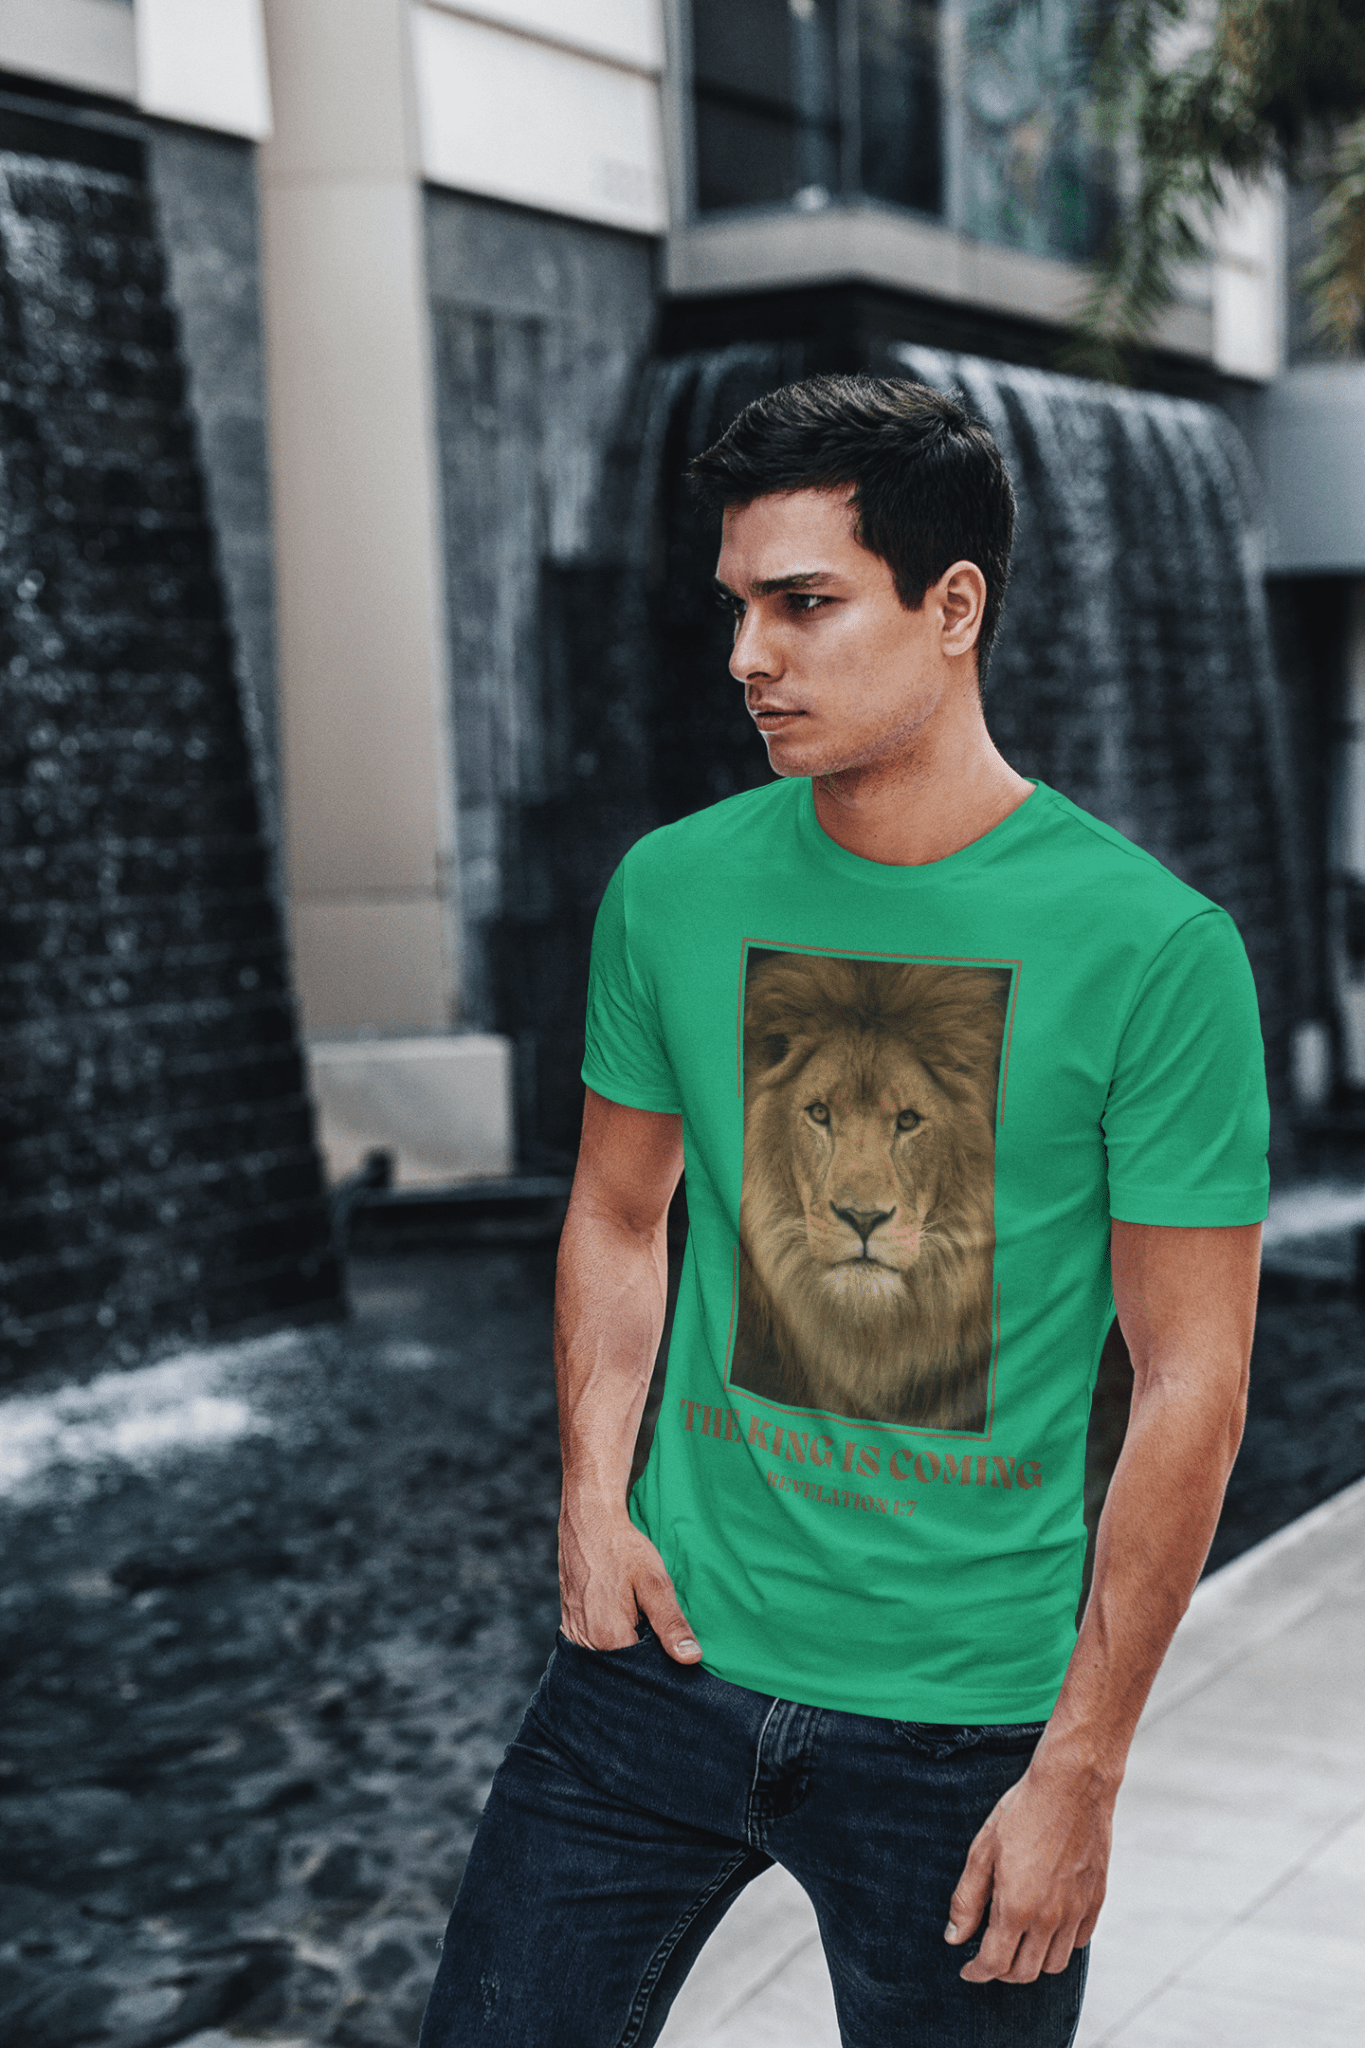 The King Is Coming T-Shirt - Lion Revelation Christian Tee on eastern european man in front of waterfall